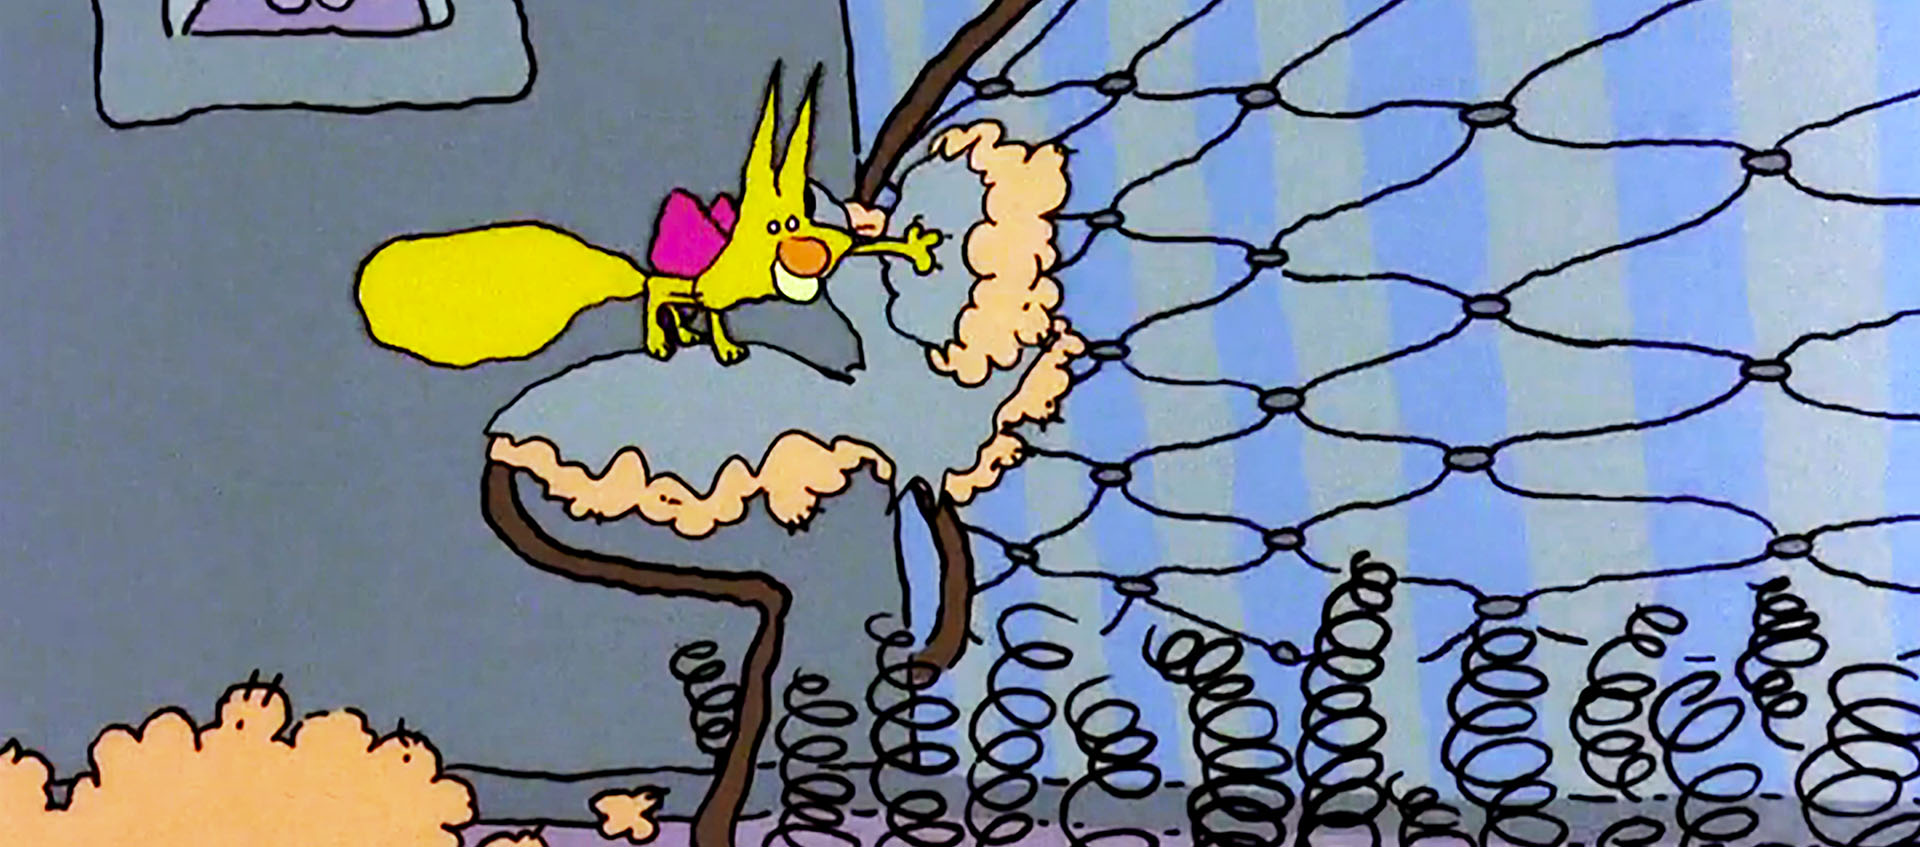 A yellow cat claws the last shred of upholstery on a couch in a scene from Cordell Baker's 1988 animated short The Cat Came Back